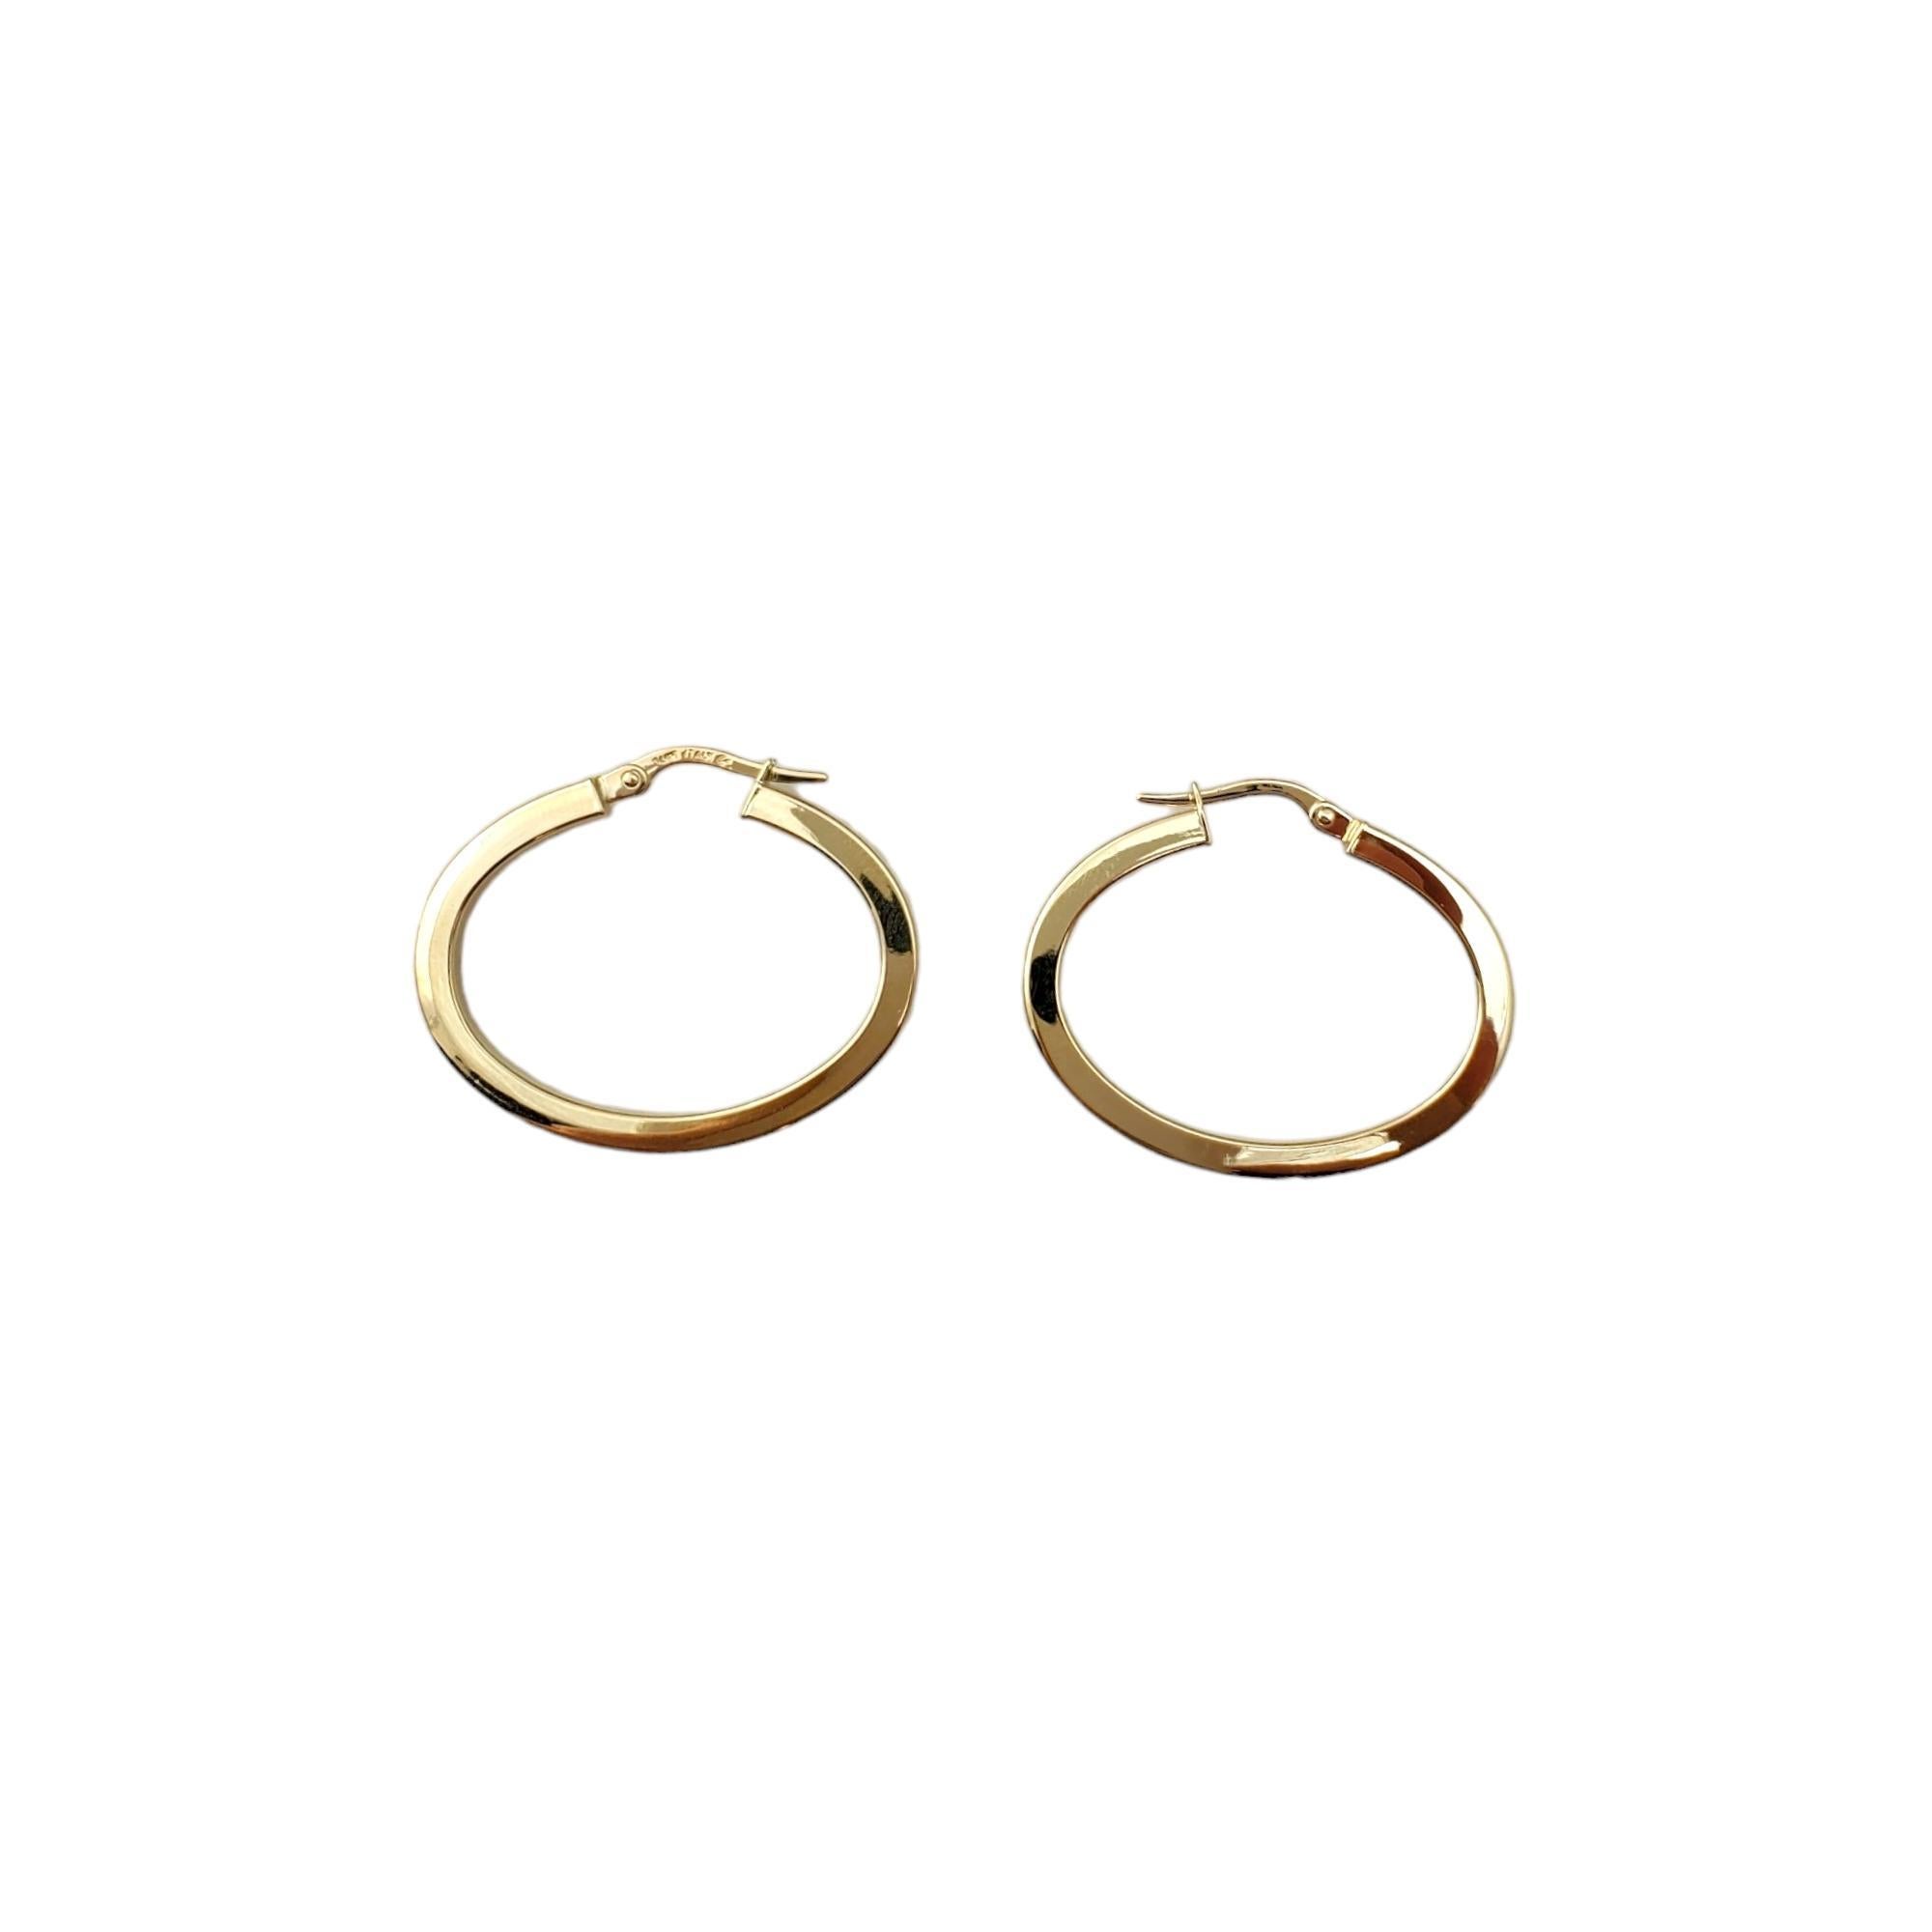 14K Yellow Gold Hoop Earrings -

These simple hoop earrings are a classic accessory. 

Size:  30.0 mm X 2.6 mm X 2.8mm 

Hang a little over an inch in length. Approx. 3mm wide

Weight:  1.2 dwt. /  2.0 gr.

Marked: 14K Italy

Very good condition,